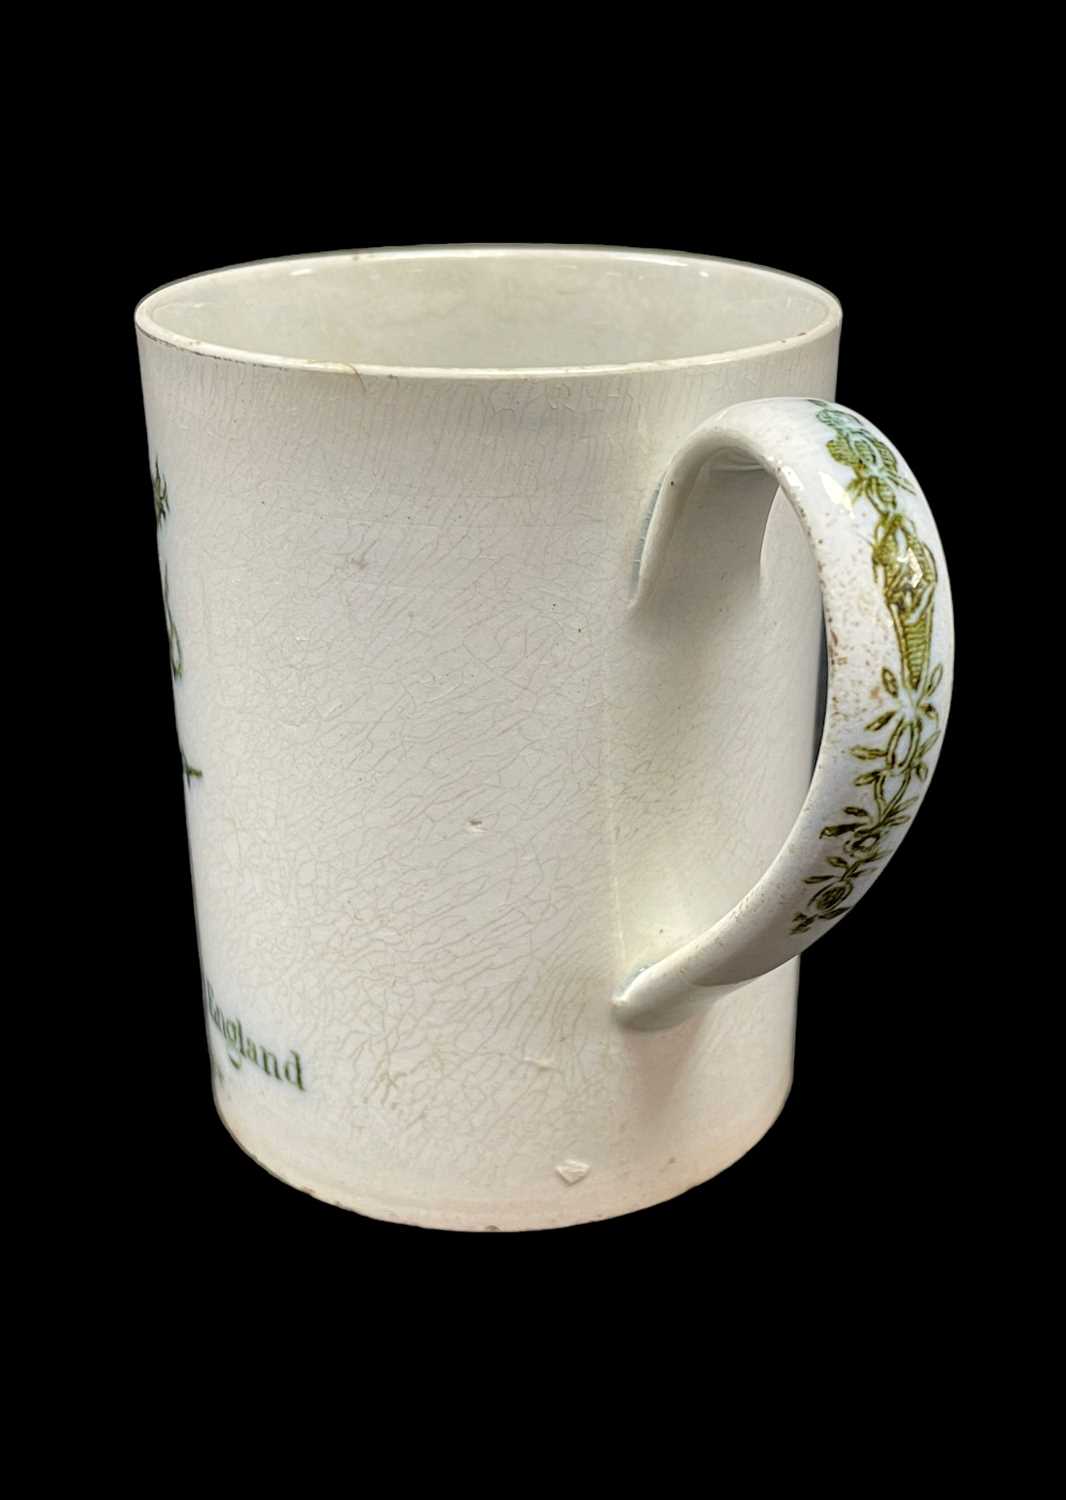 RARE SWANSEA CAMBRIAN PEARLWARE VISUAL ILLUSION MUG, circa 1795, of cylindrical form with ear-shaped - Image 4 of 4